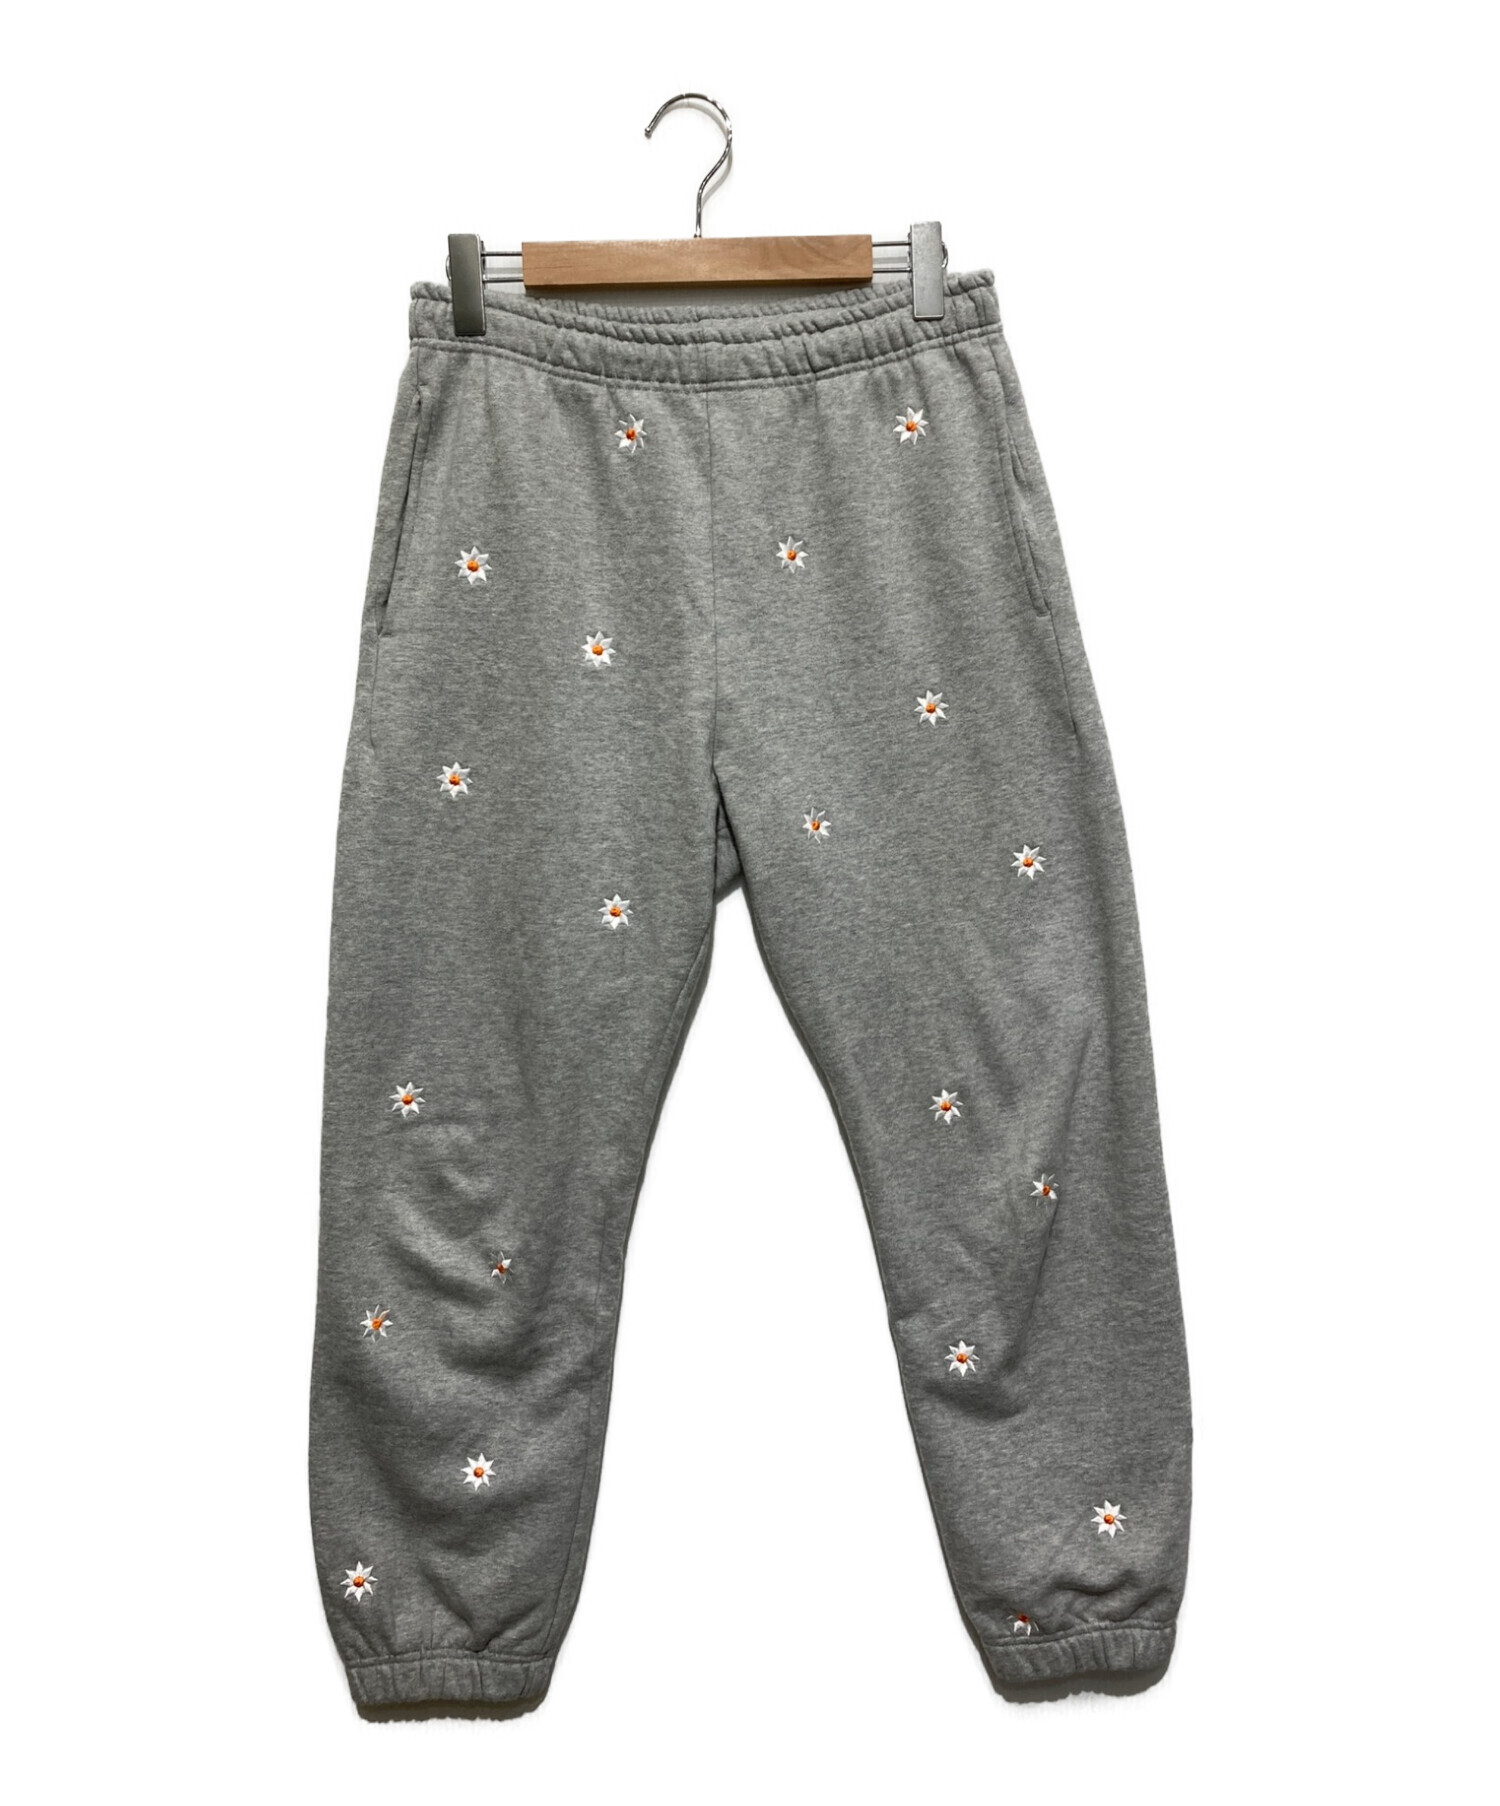 Women's Embroidered Floral Pants Graphic Sweatpants, French Terry